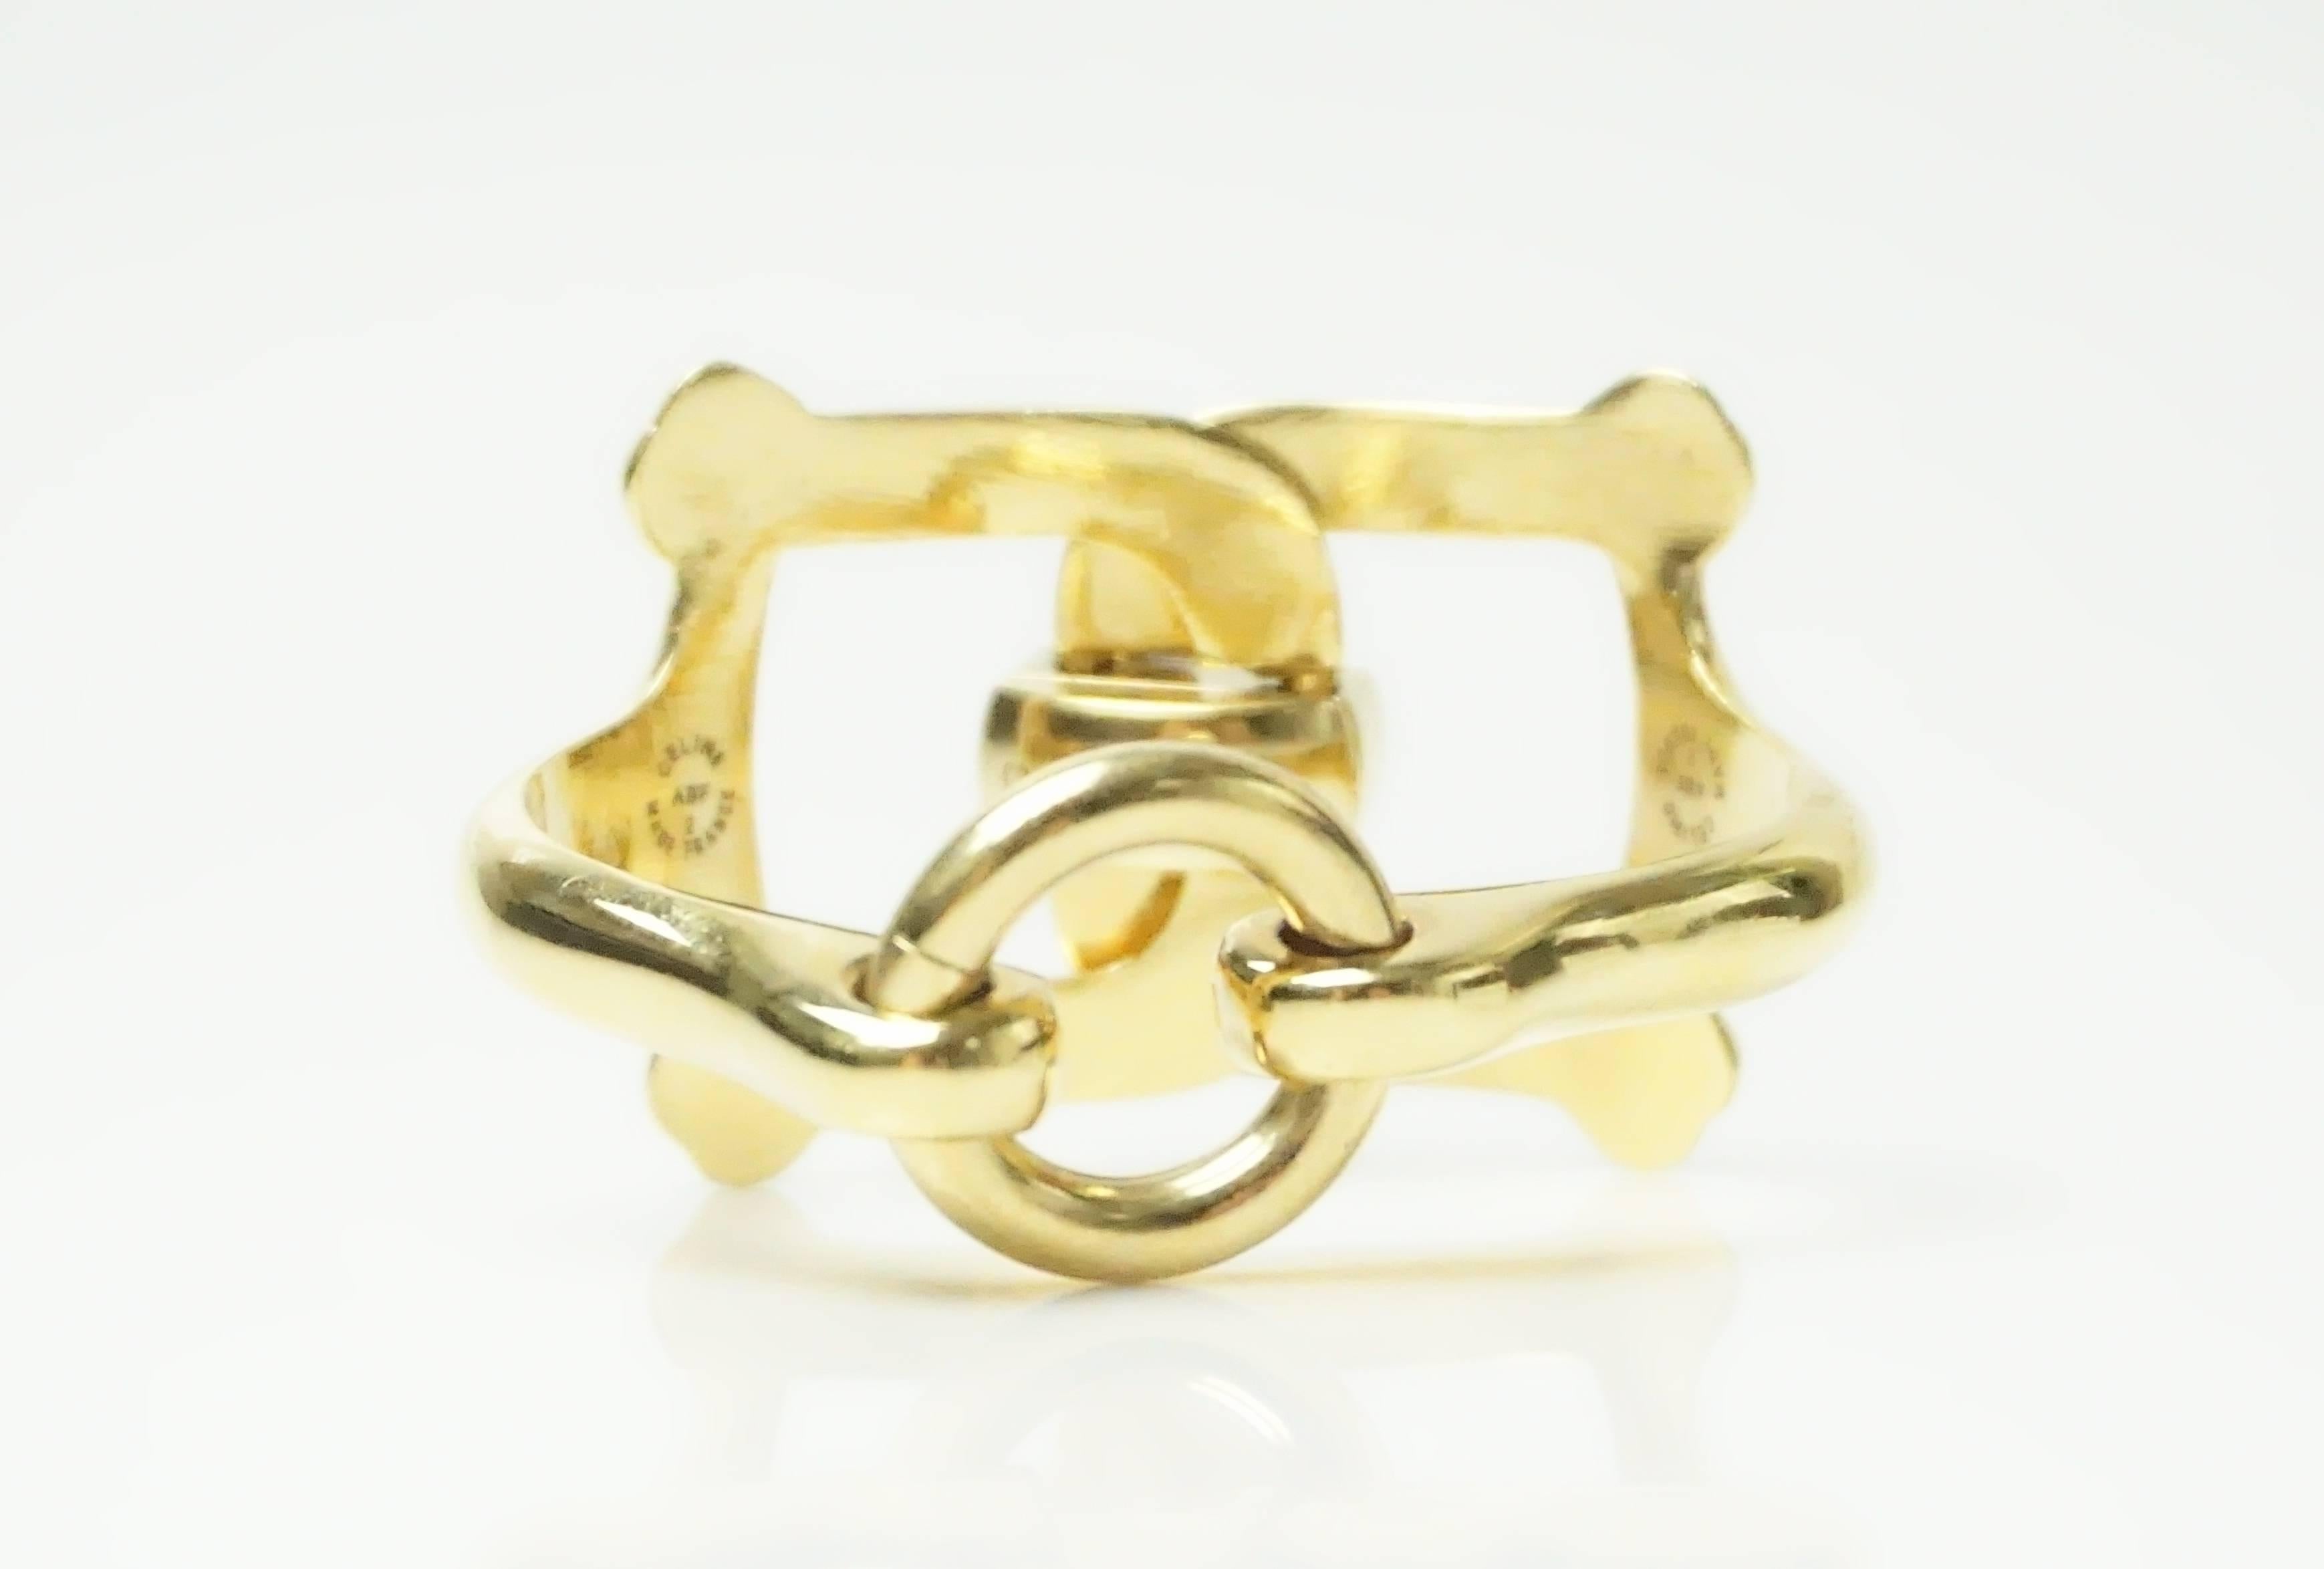 Celine Goldtone Horsebit Bracelet - This very beautiful and iconic piece makes a beautiful fashion statement. The item is in excellent condition.

Measurement:
Depth 1.75